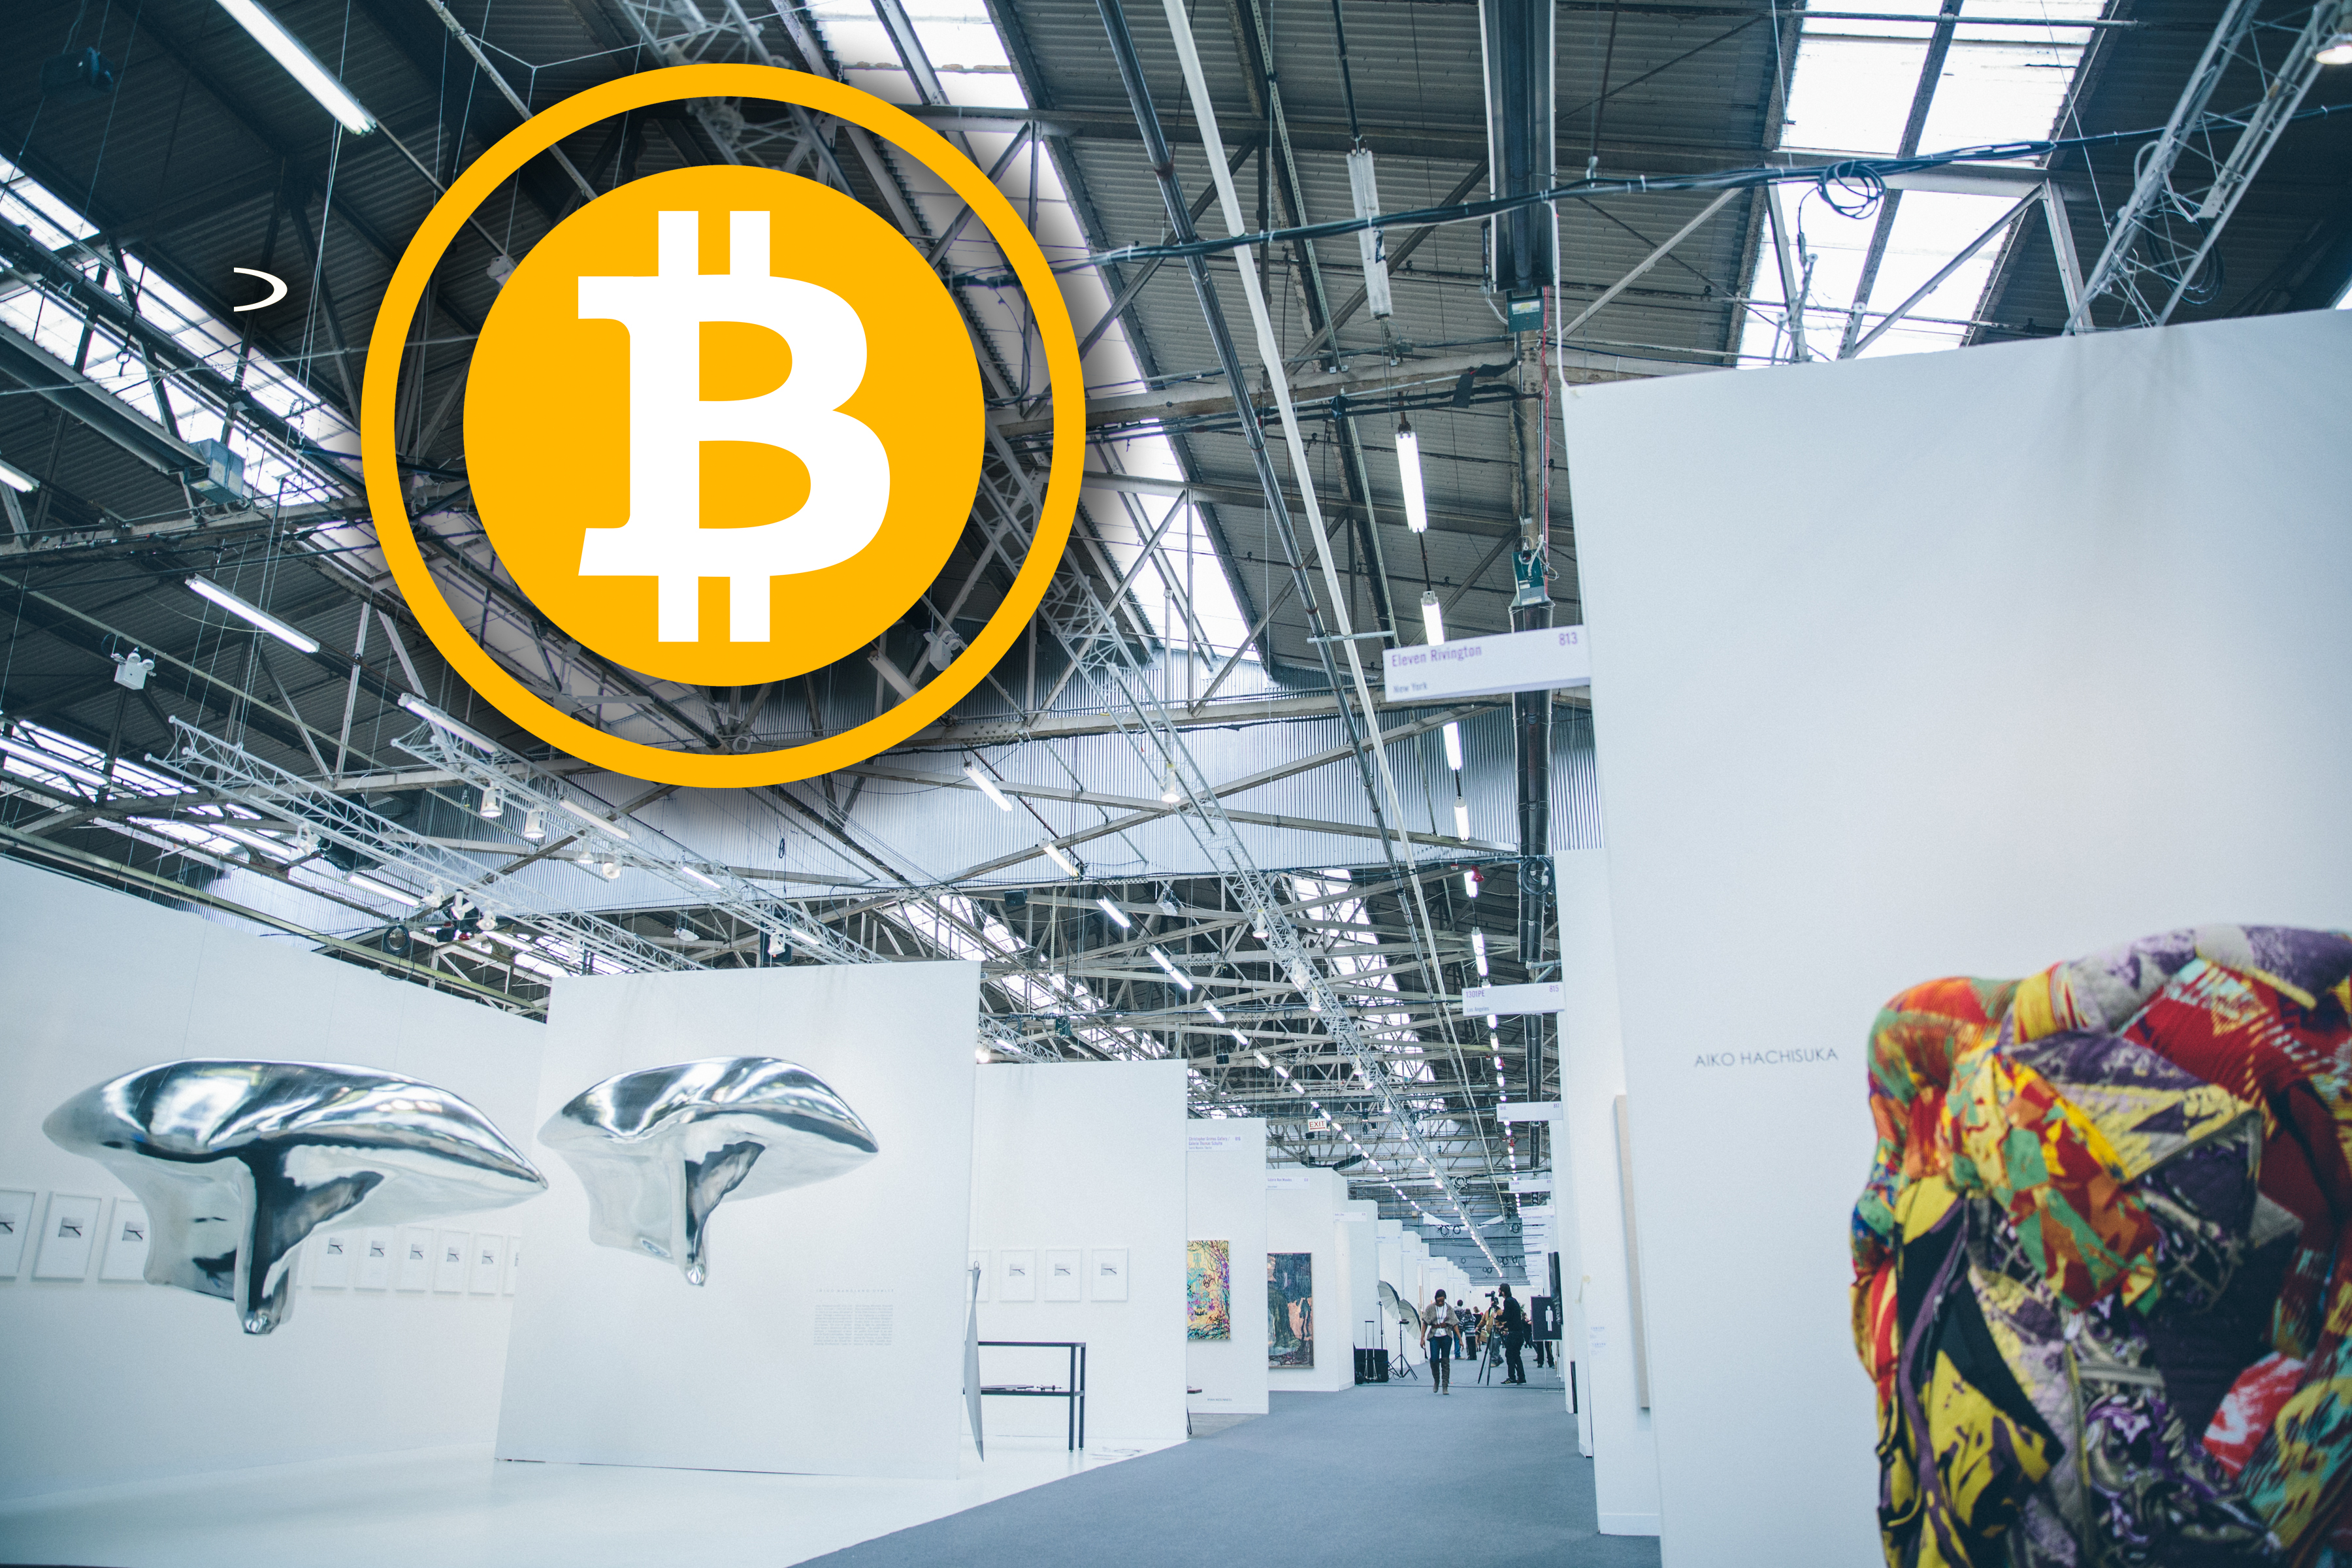 The Armory Show is one of the world's top contemporary art exhibitions each year. We went to see if anyone would sell us art if we offered them tons of bitcoin. (Photo: Roberto Chamorro, with alteration by Jack Smith IV)